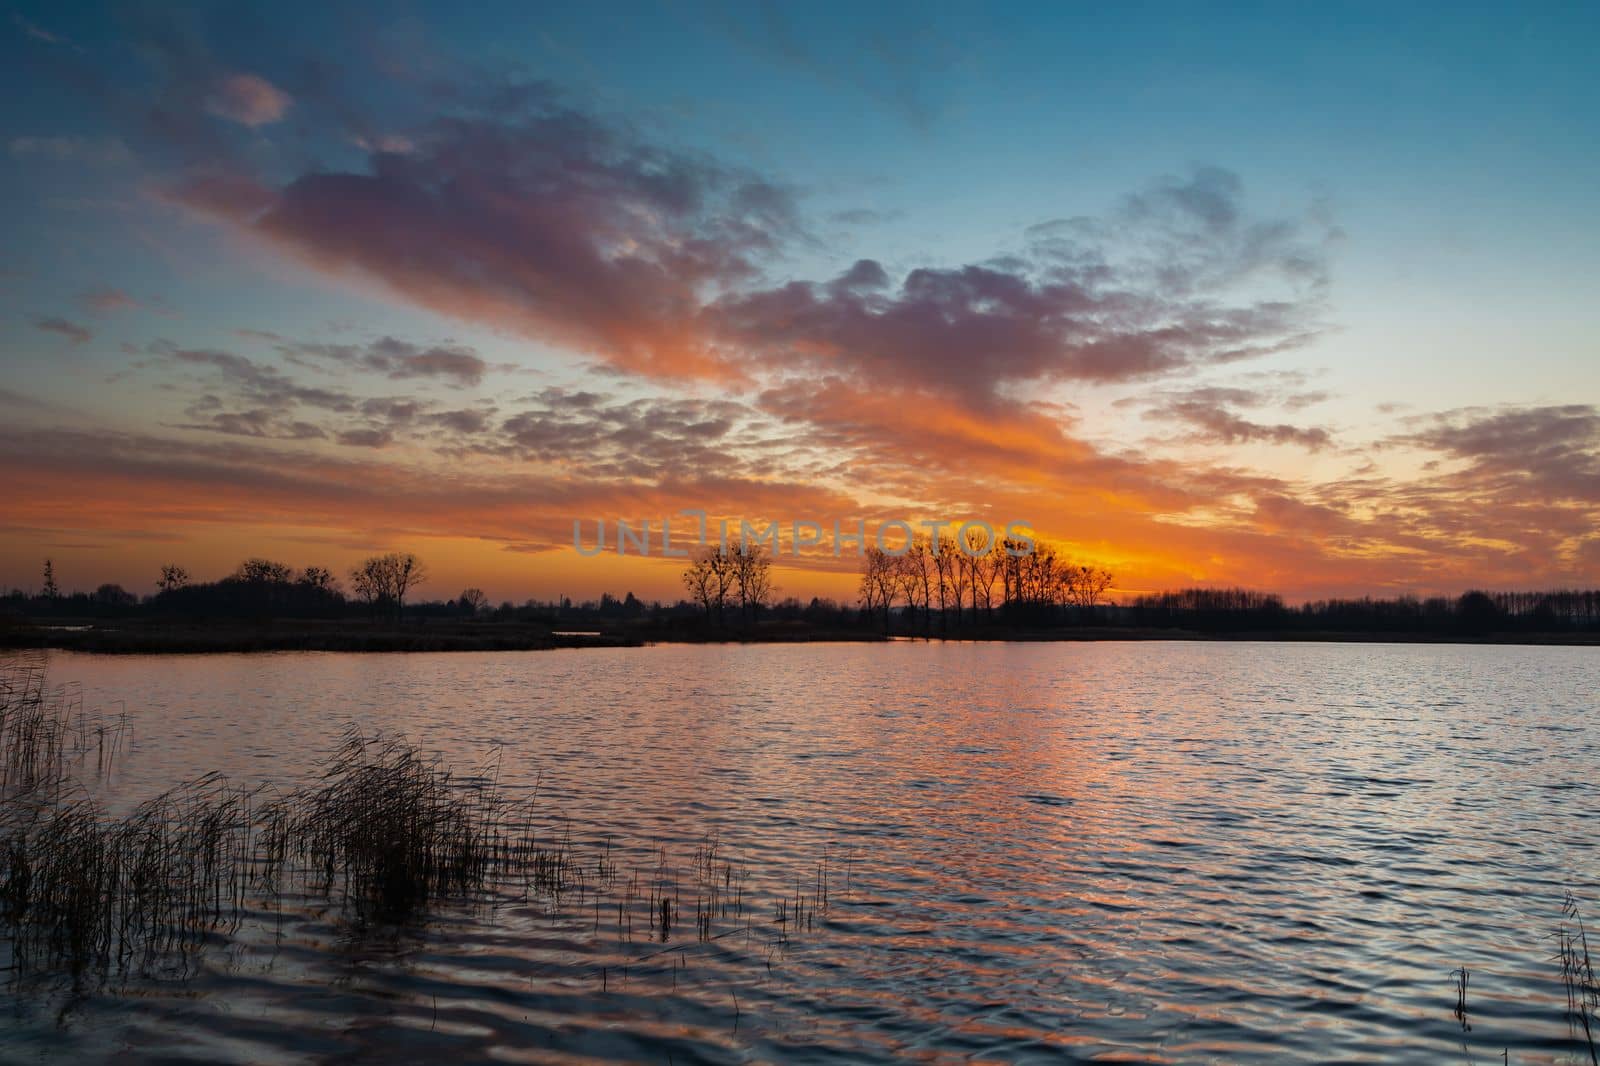 Colorful clouds after sunset over calm lake, Stankow, Poland by darekb22